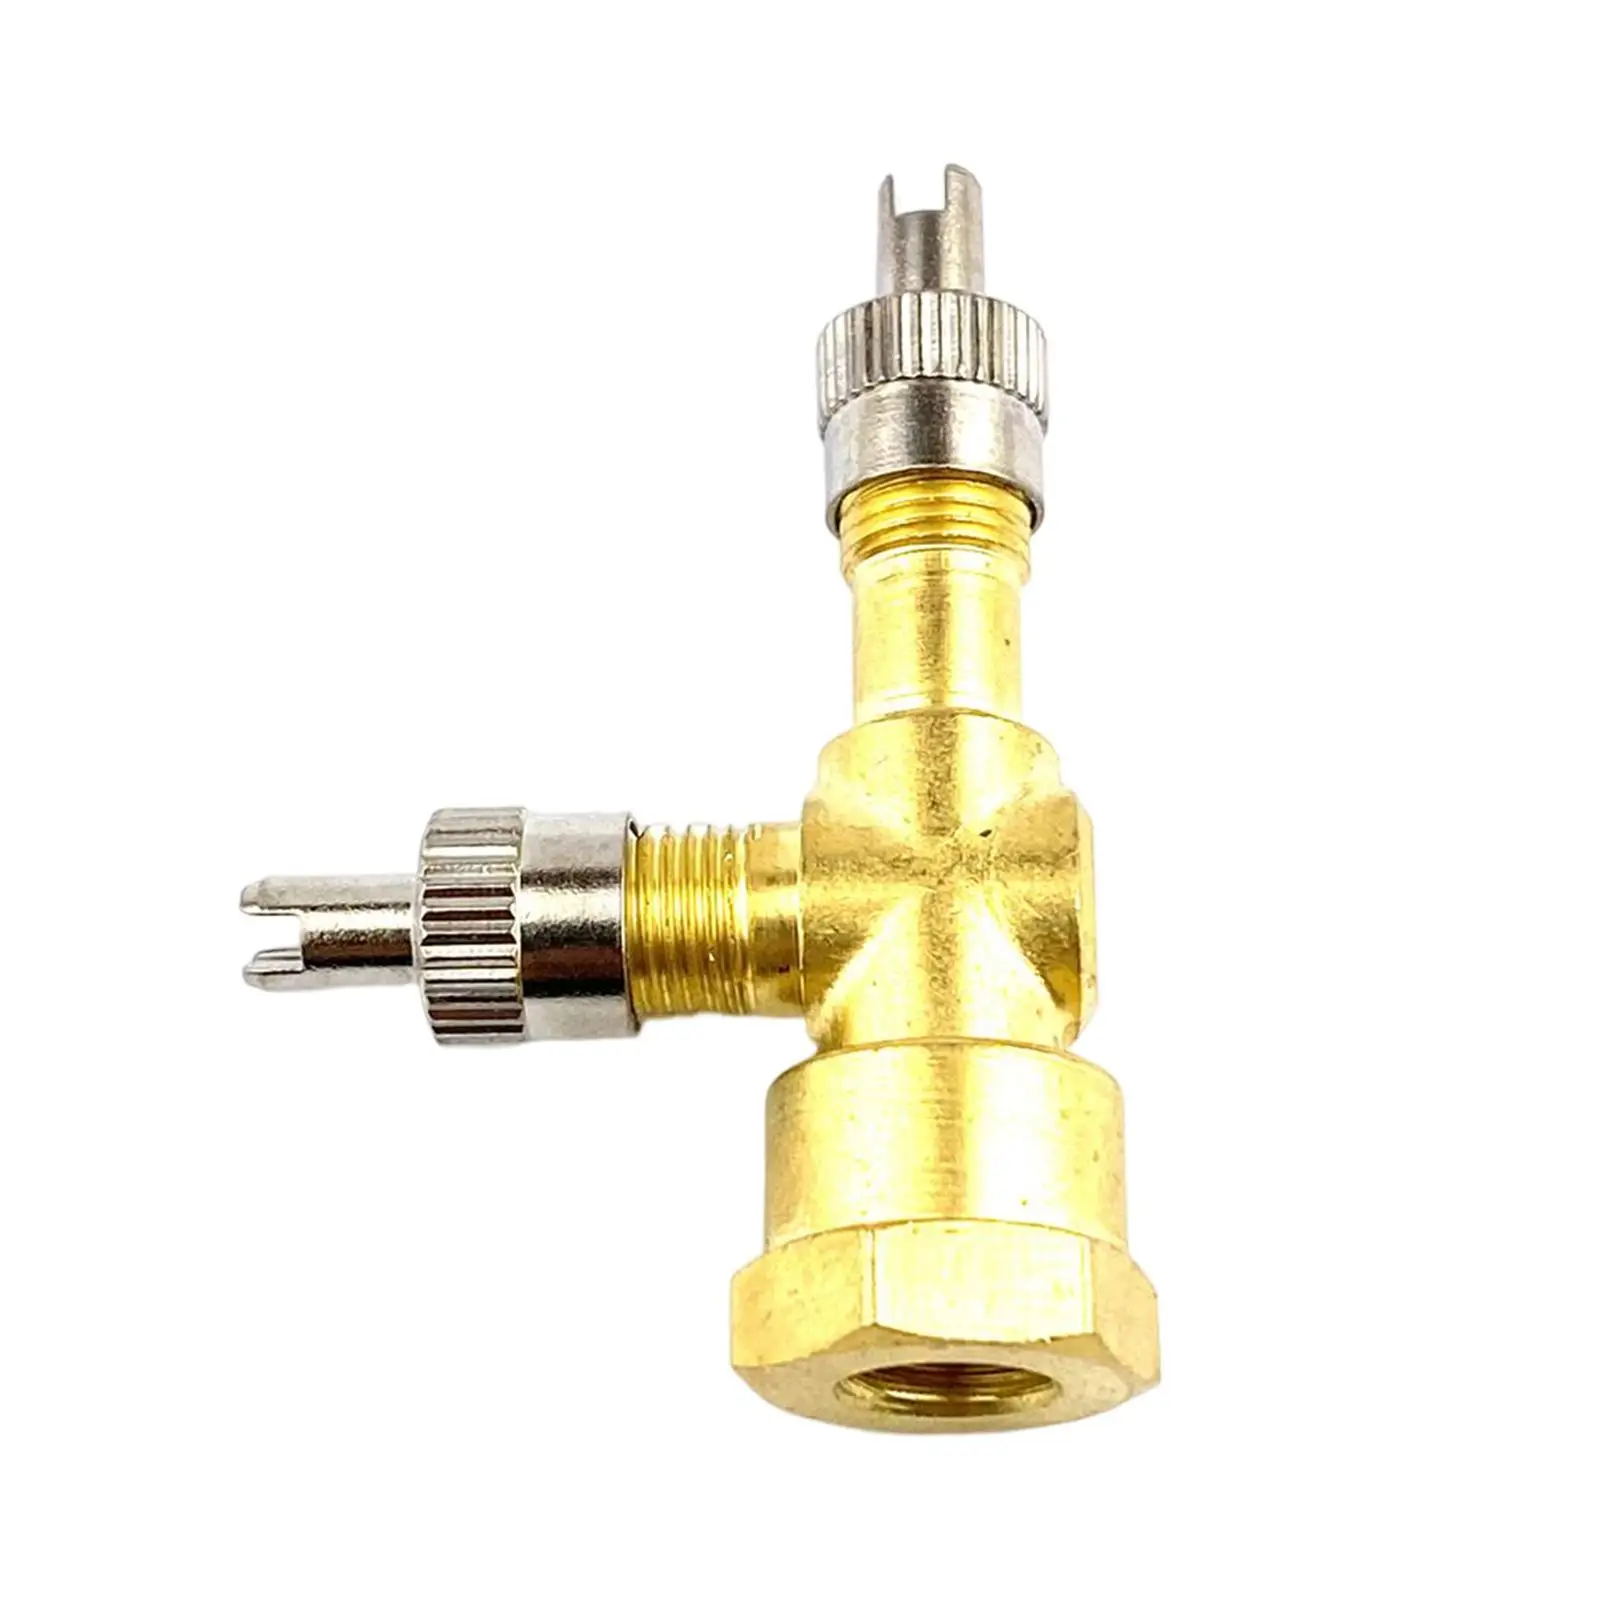 Tire valves Nozzle Copper Wheel Repair Accessories Garage Tool for Motorcycles